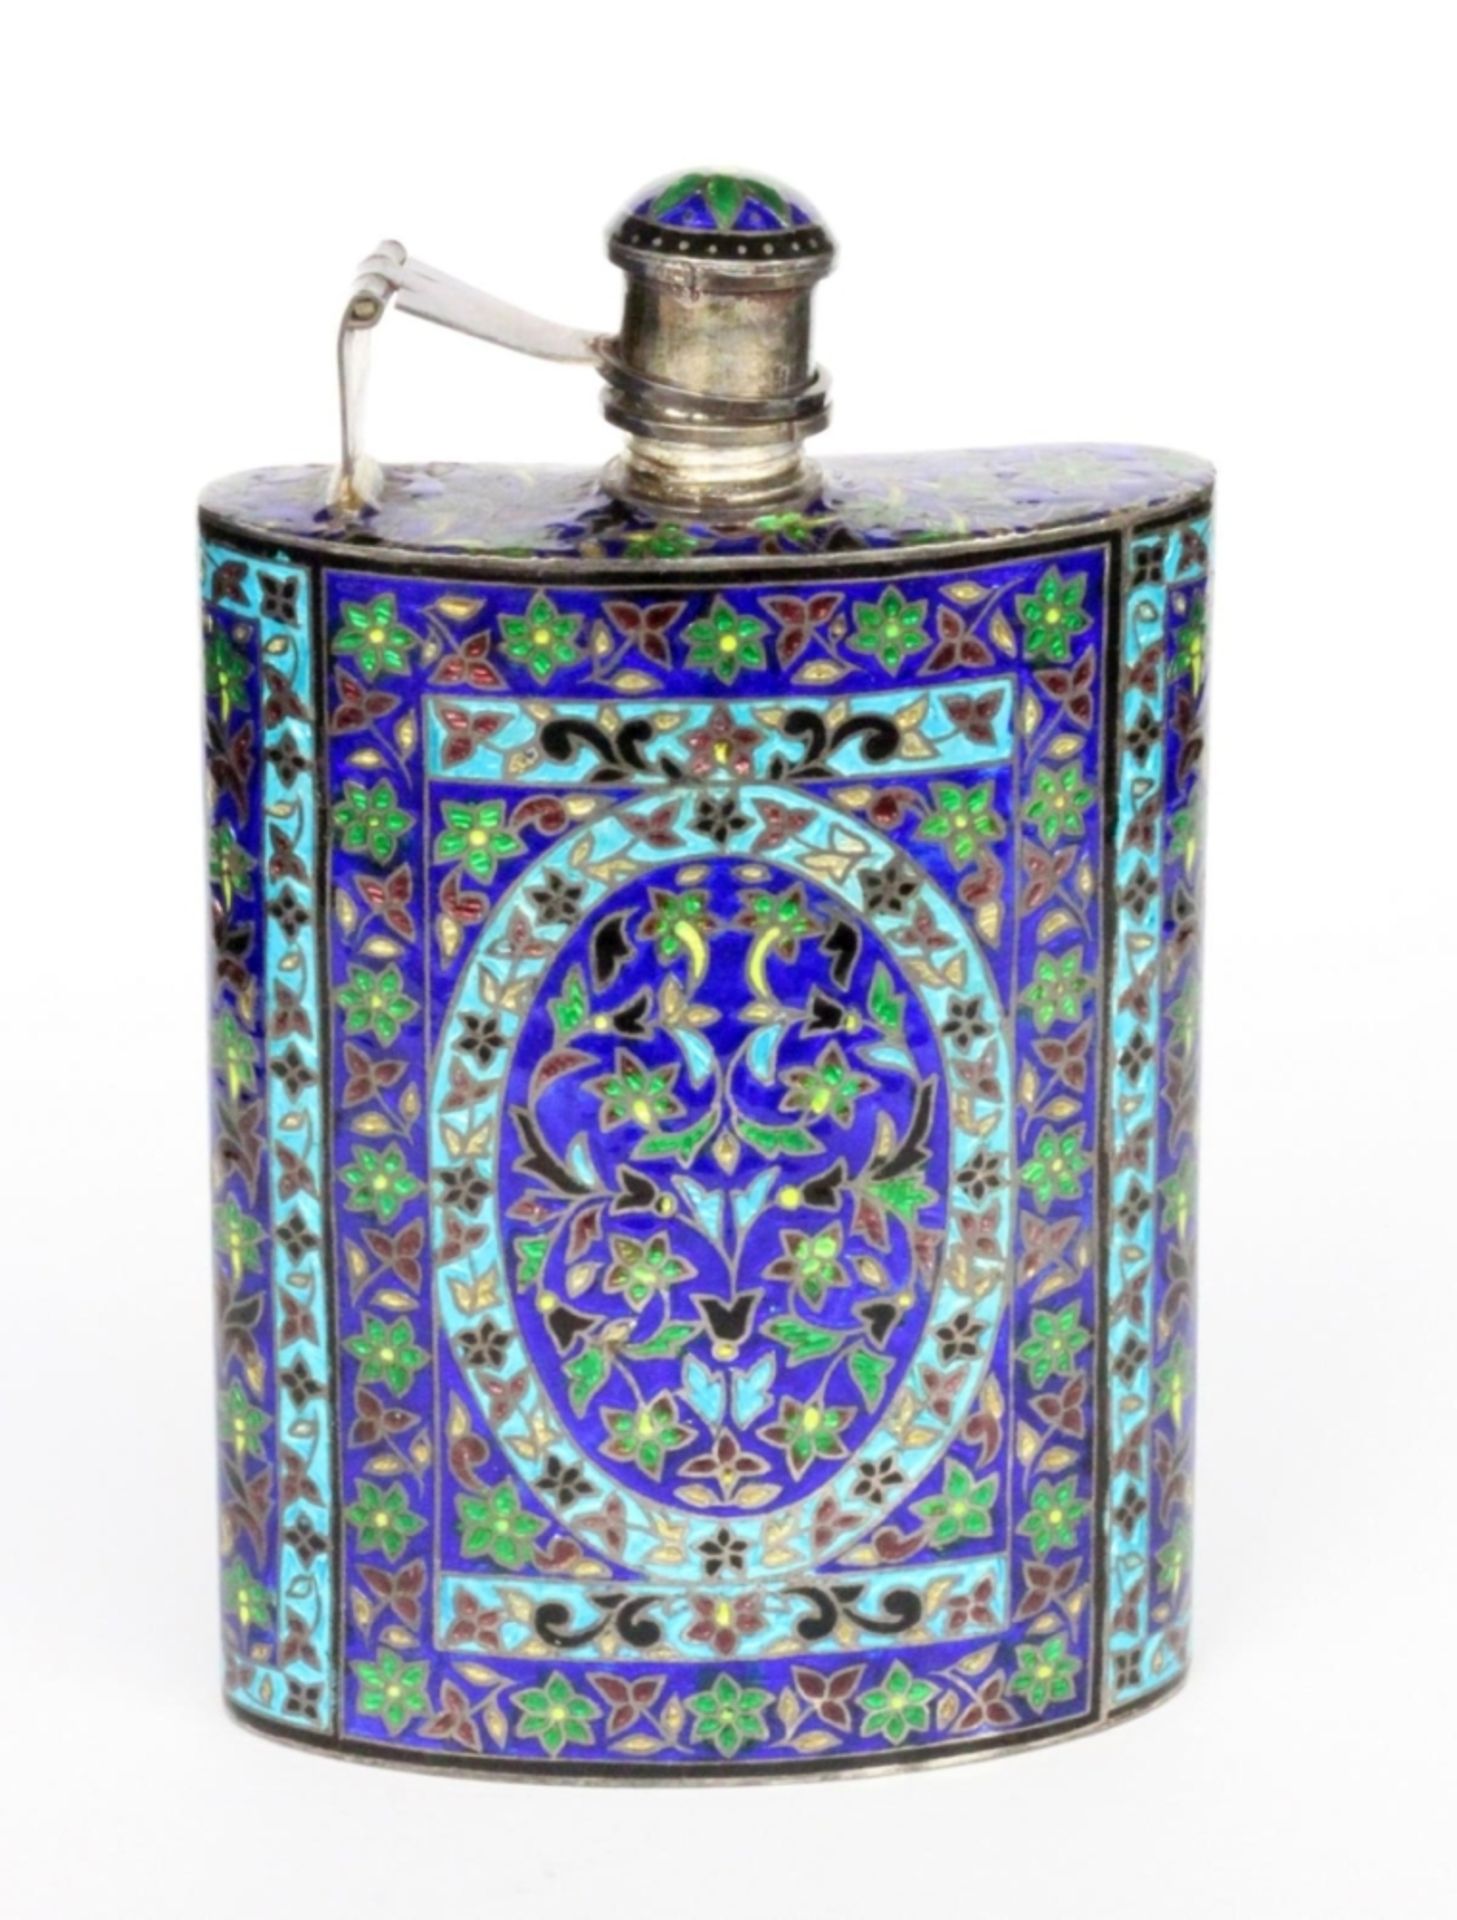 A HIP FLASK 20th century 925/000 sterling silver with colourful cloisonne enamel.